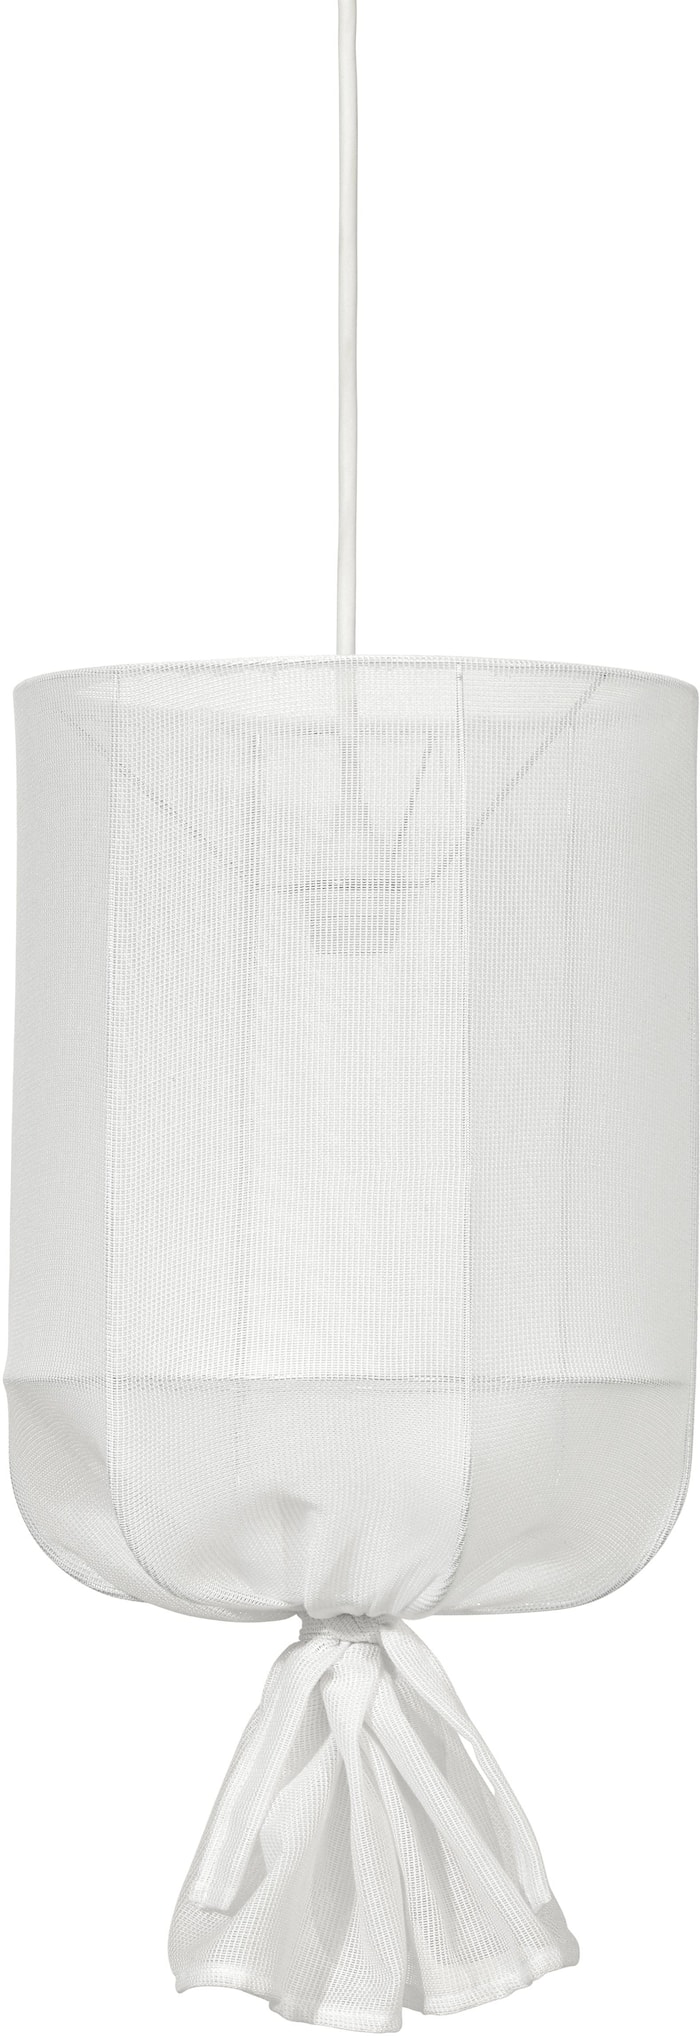 Round Outdoor Sheer Offwhite 30cm